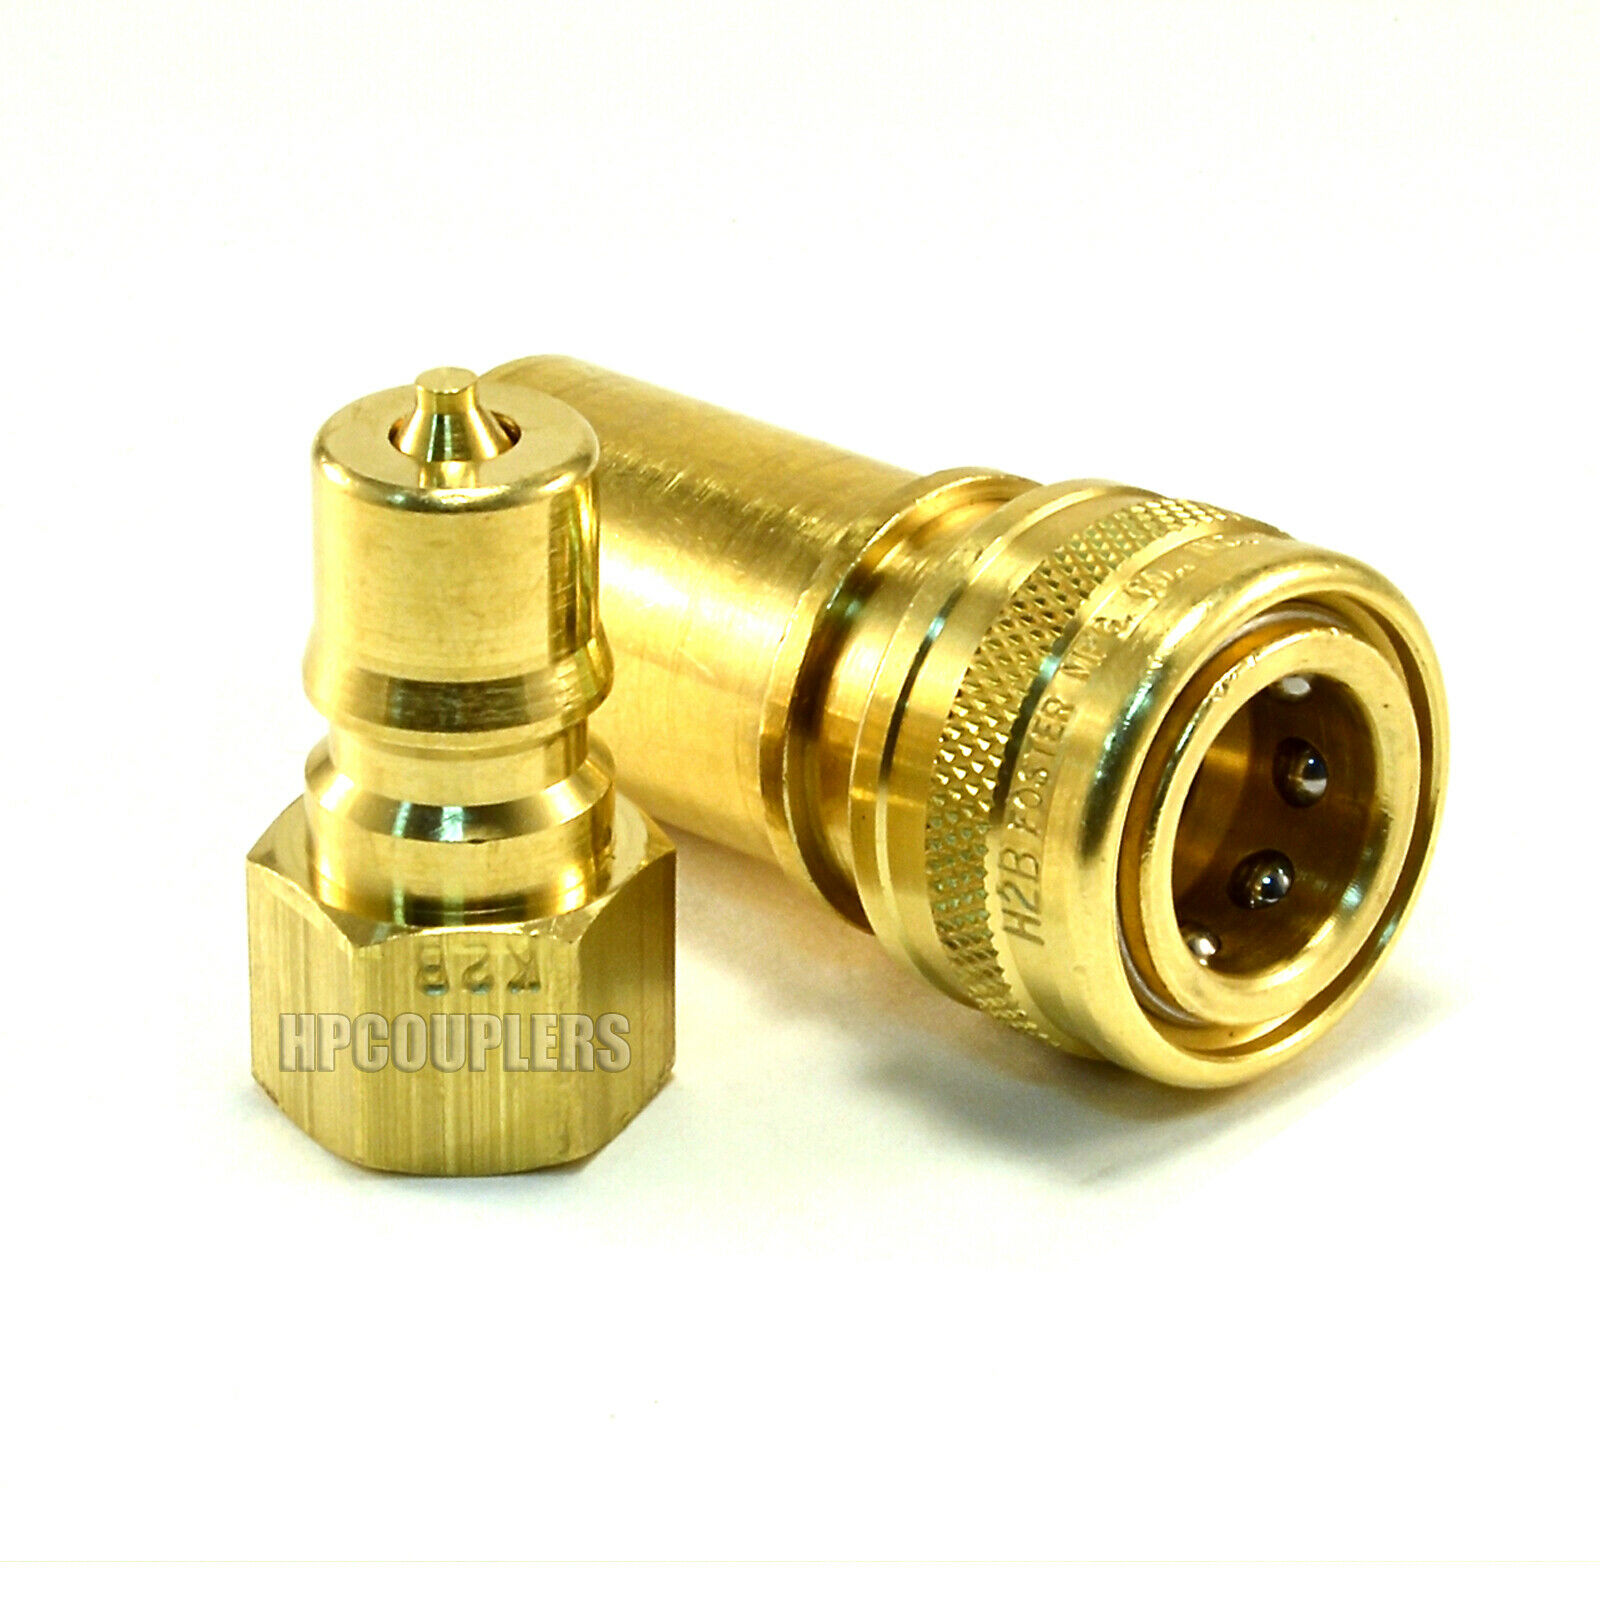 Carpet Cleaning - 1/4" Brass Quick Disconnect Qd Hose Wand Truckmount Extractor